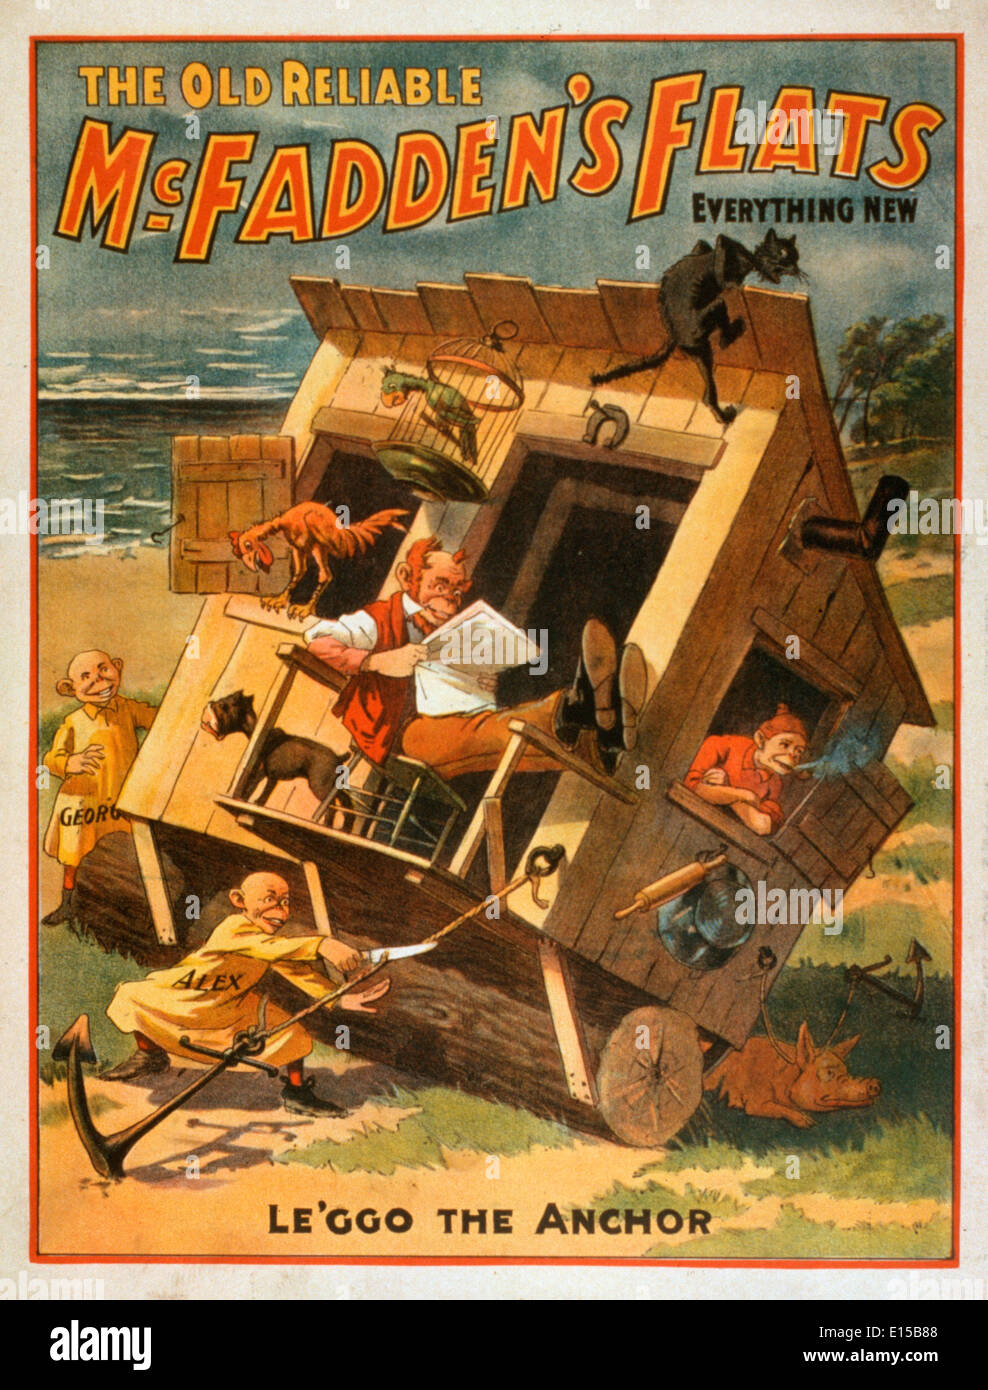 The old reliable McFadden's flats everything new. Poster for play, circa 1902 Stock Photo